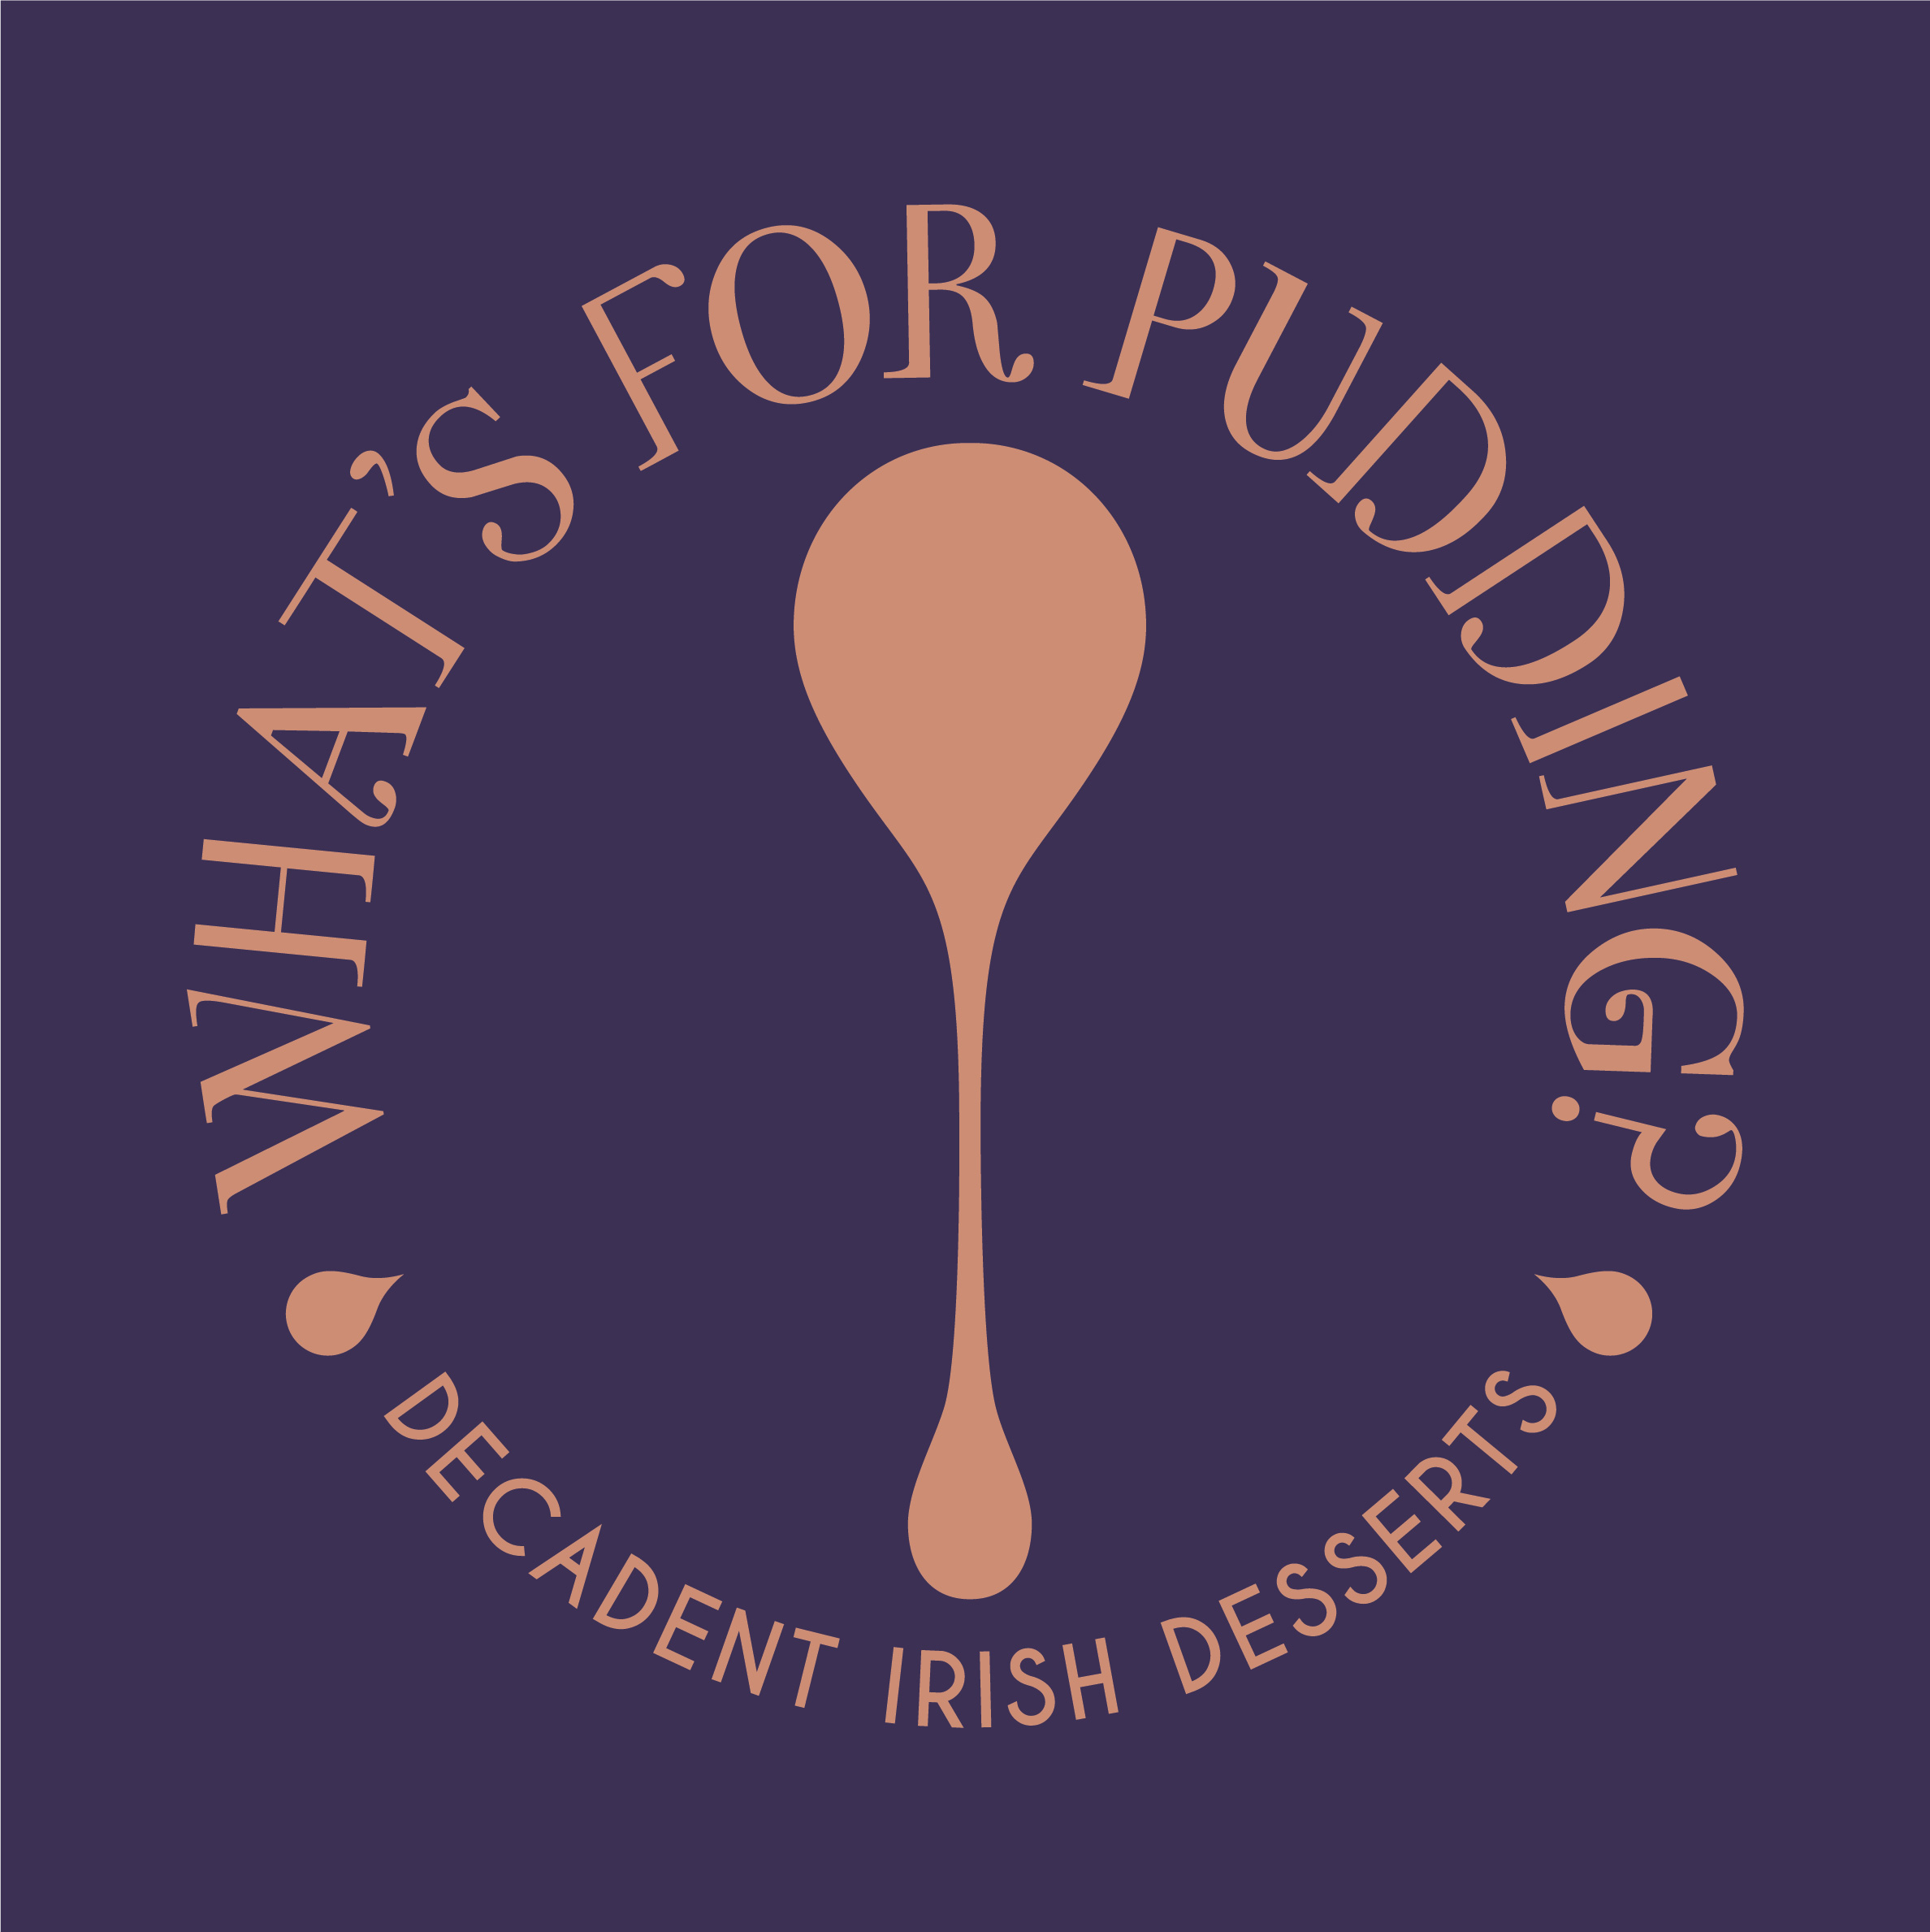 What's For Pudding - Royal County Puddings